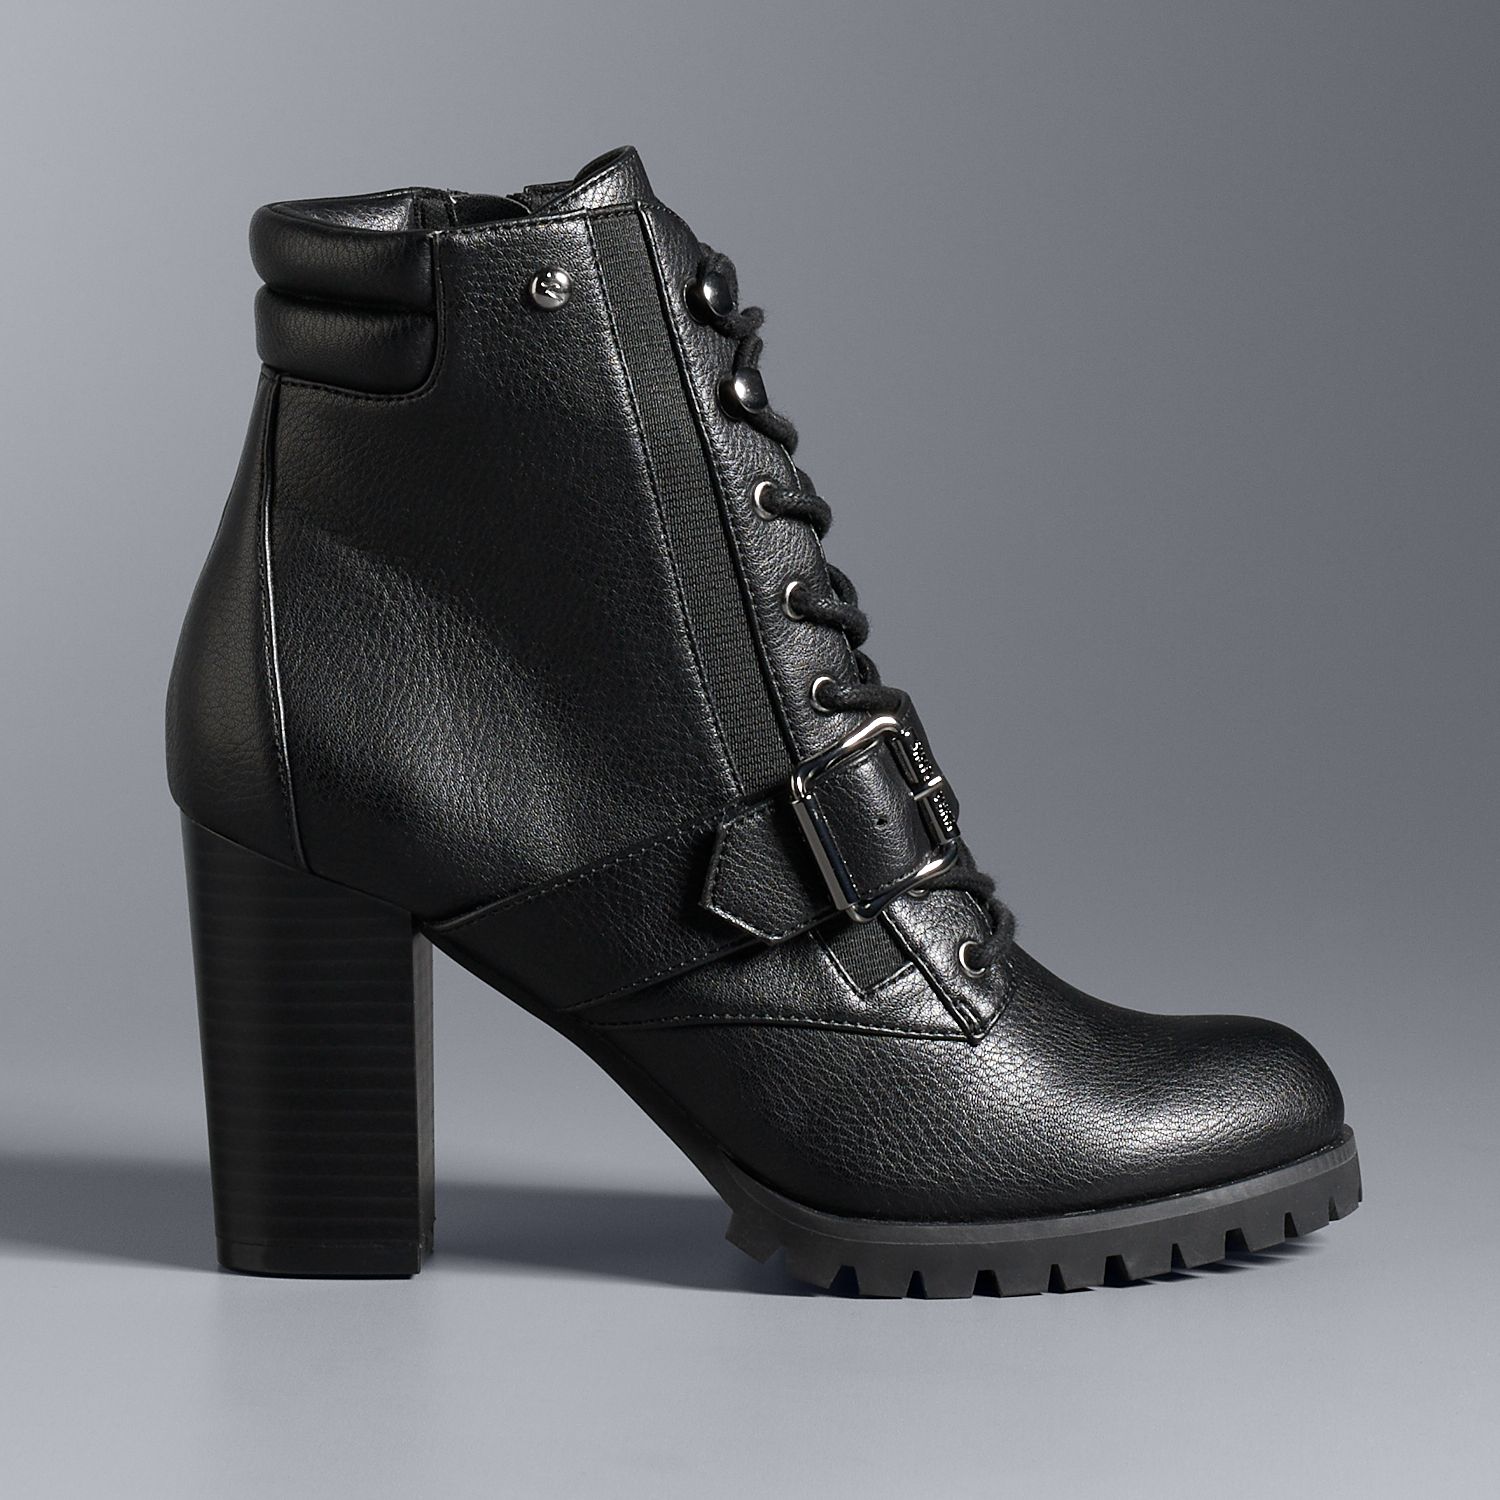 simply vera vera wang ankle boots